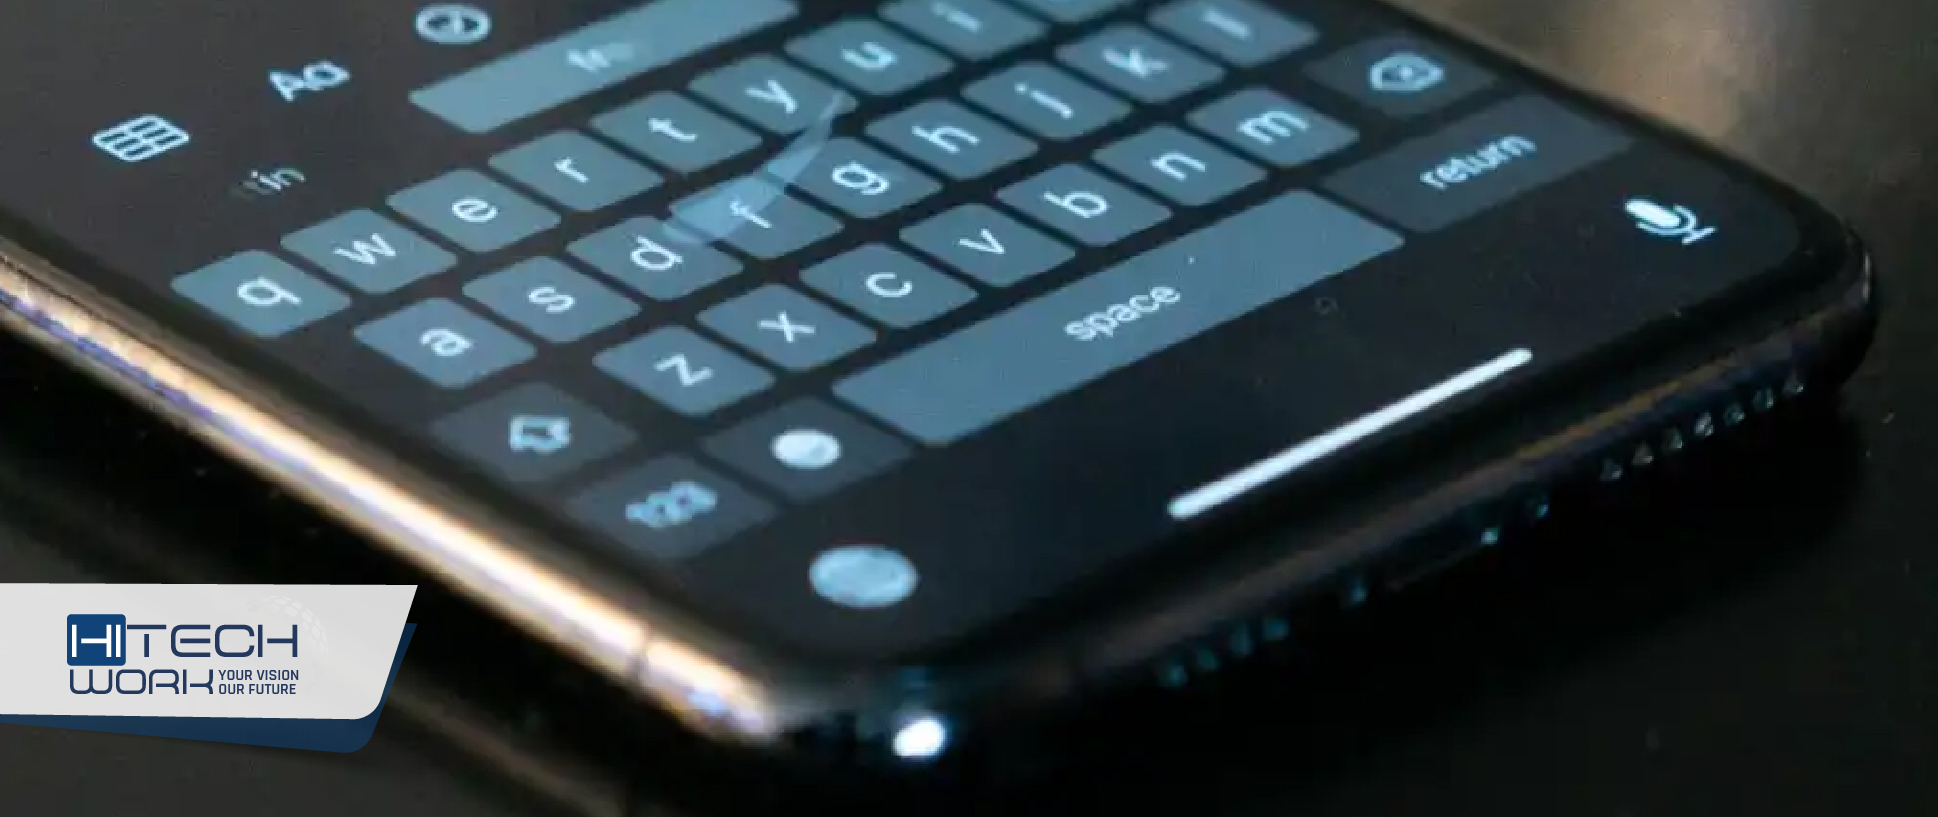 How to Use iPhone QuickPath Keyboard for Swiping